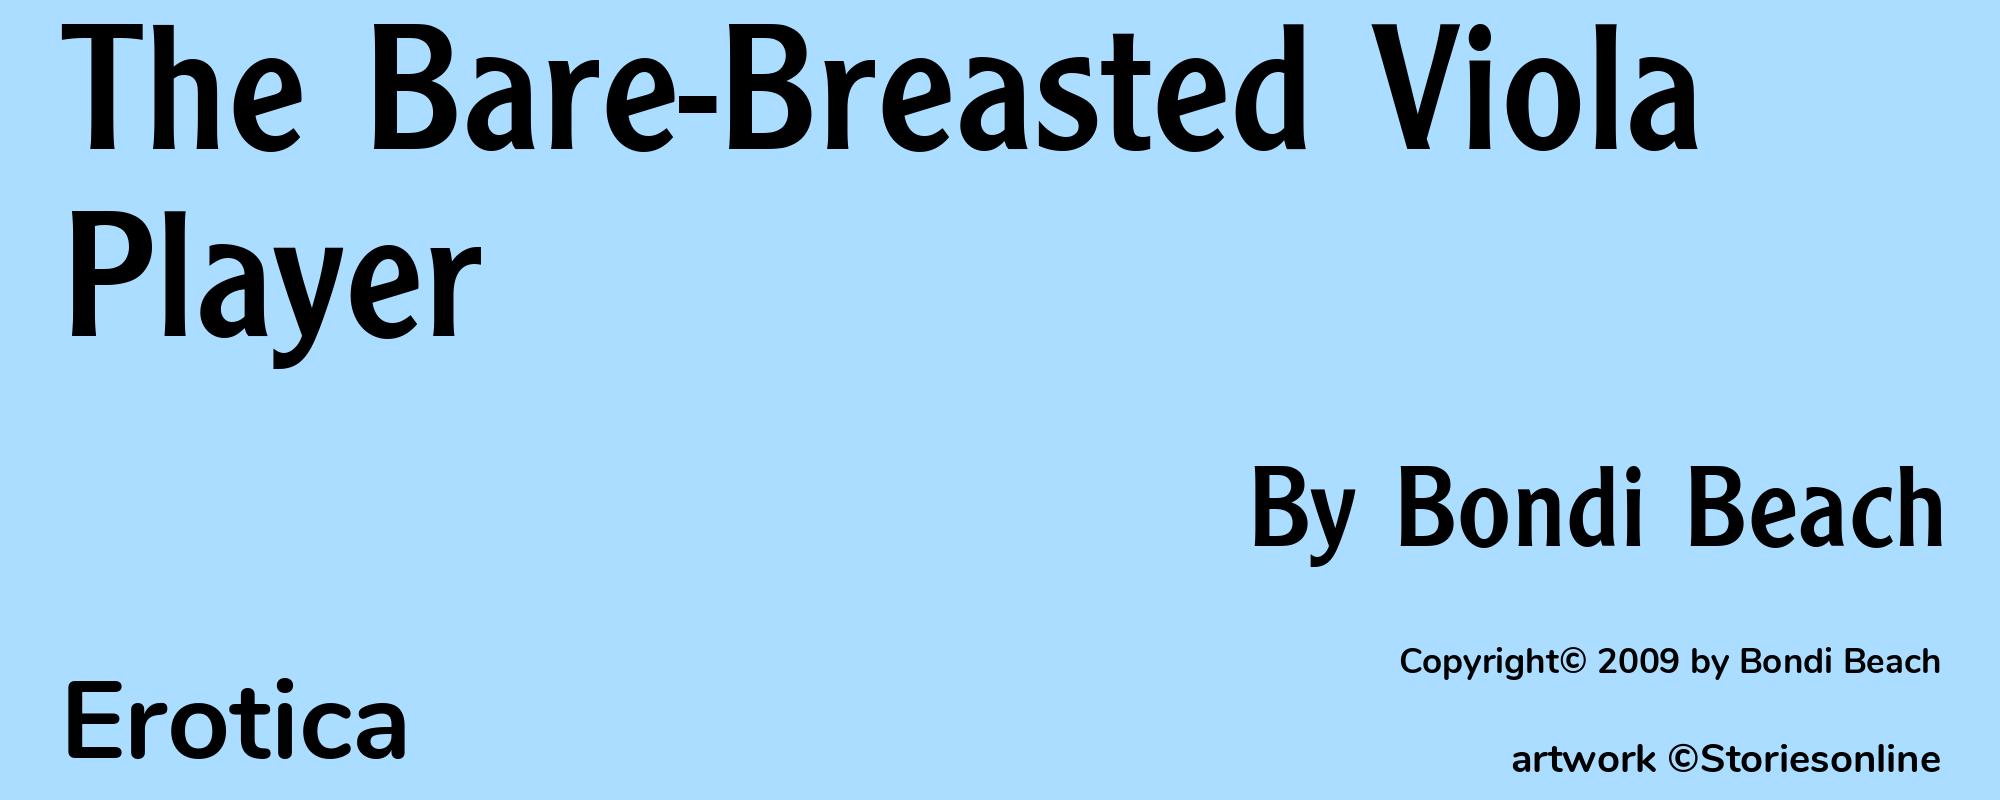 The Bare-Breasted Viola Player - Cover